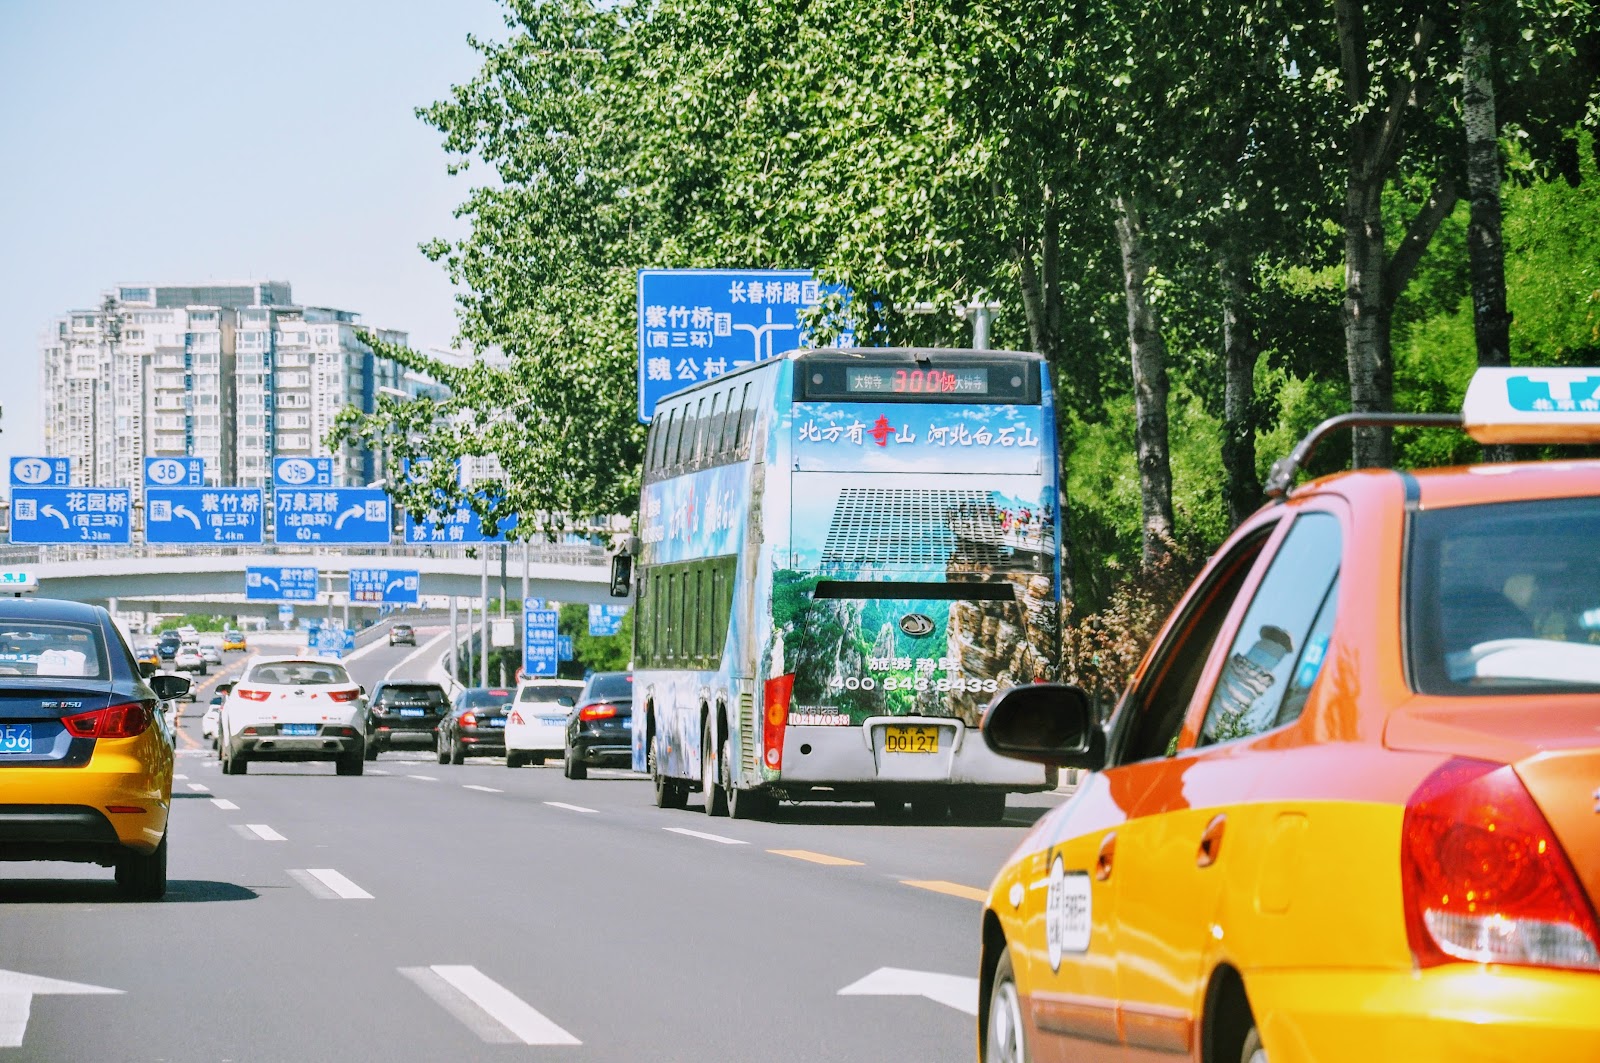 Didi Taxi App in China - Useful for business travel to China